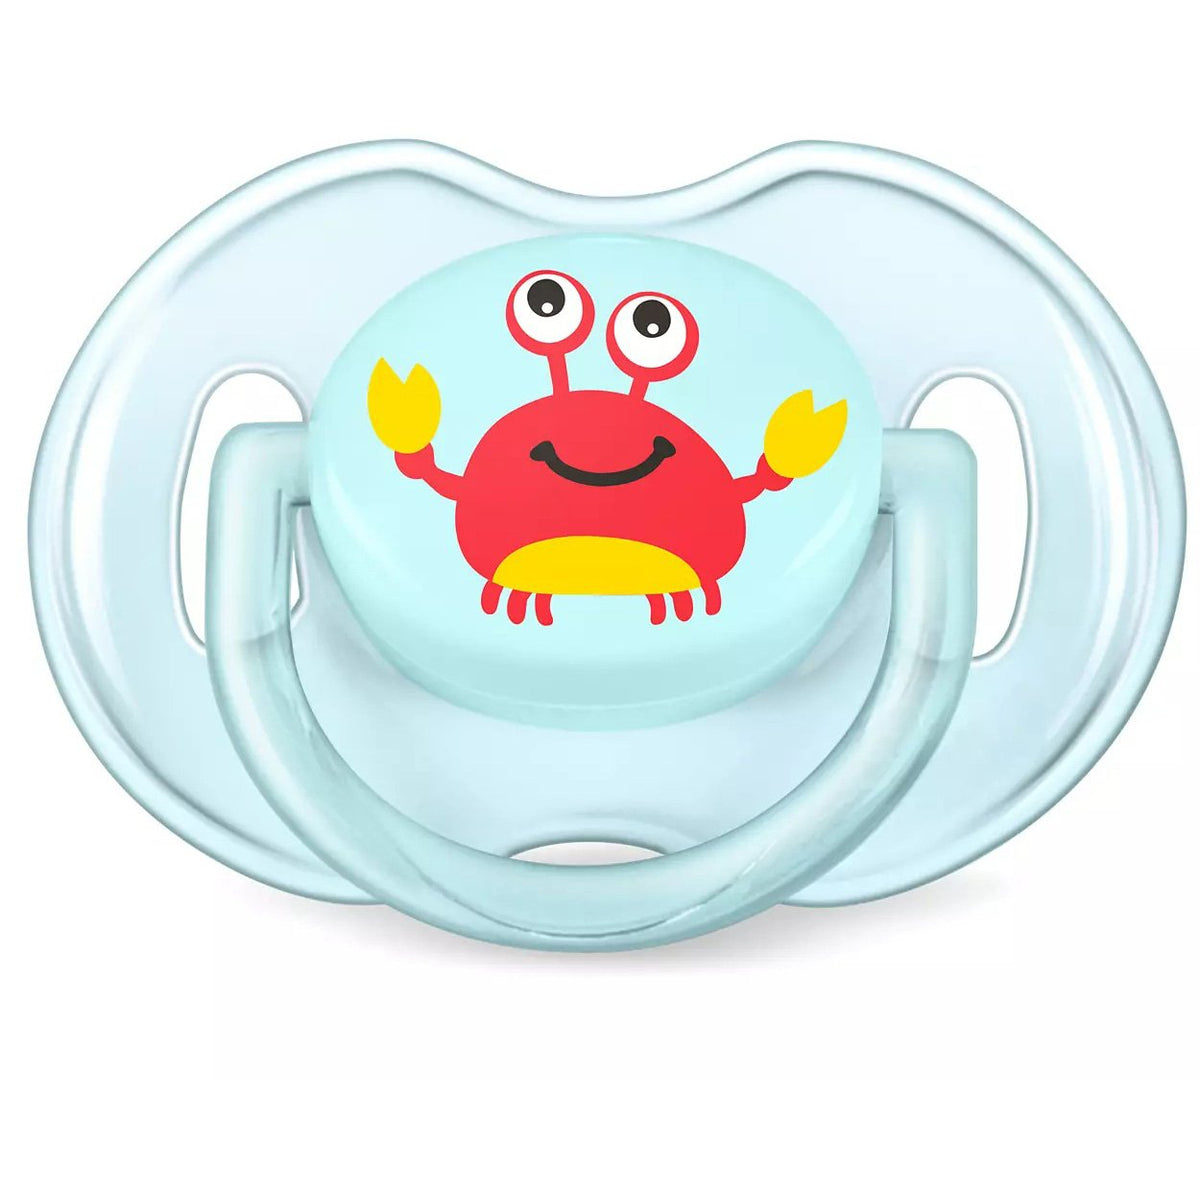 philips-avent-classic-pacifier- (5)